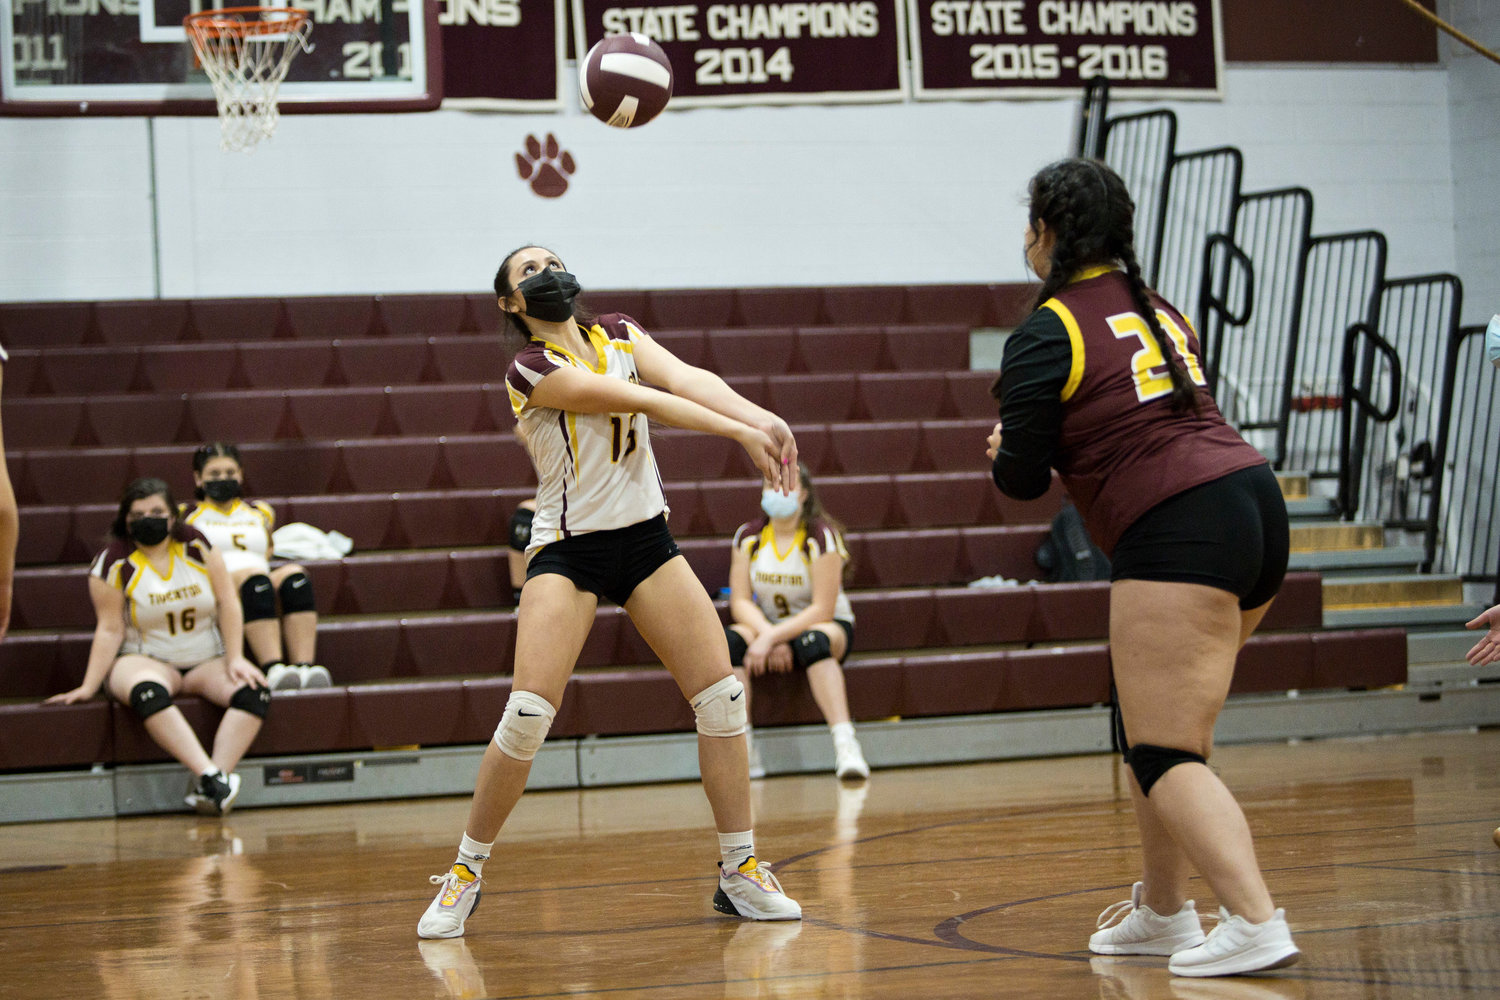 Kaylie Cabral settles the ball during Tuesday night's game against Paul Cuffee School.